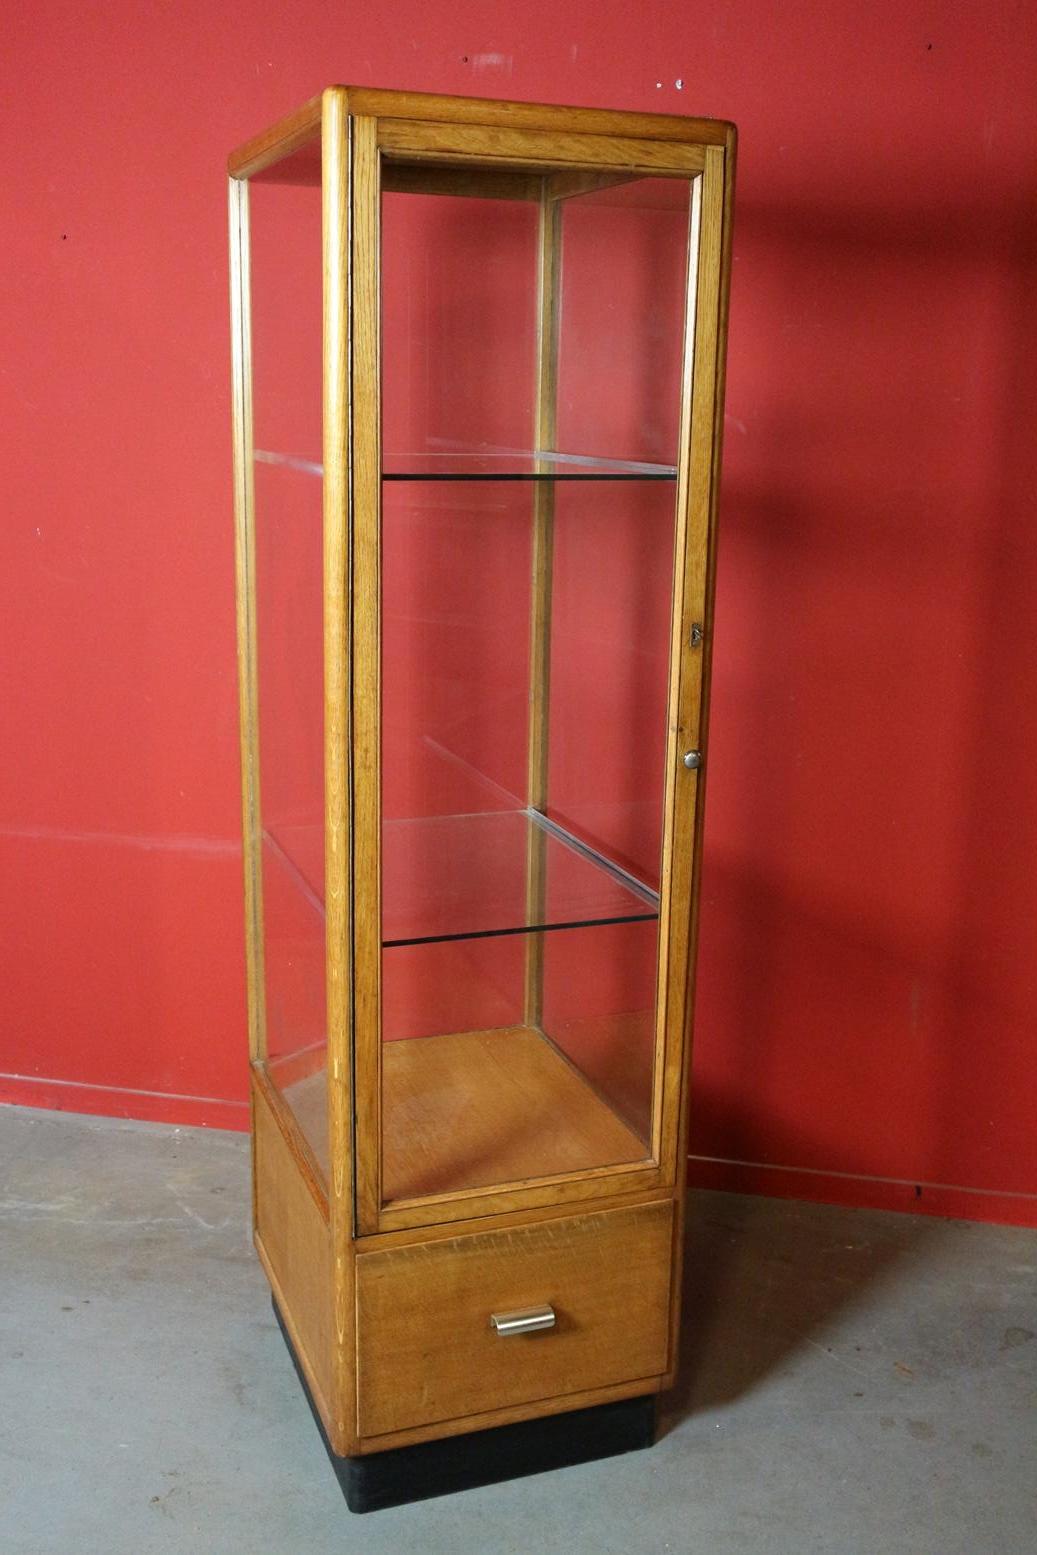 Beautiful oak shop display with 1 drawer. Showcase has 2 glass shelves. Completely in good condition.
Origin: England
Period: circa 1950-1960
Size: W 51 cm, D 60 cm, H 180 cm.
 